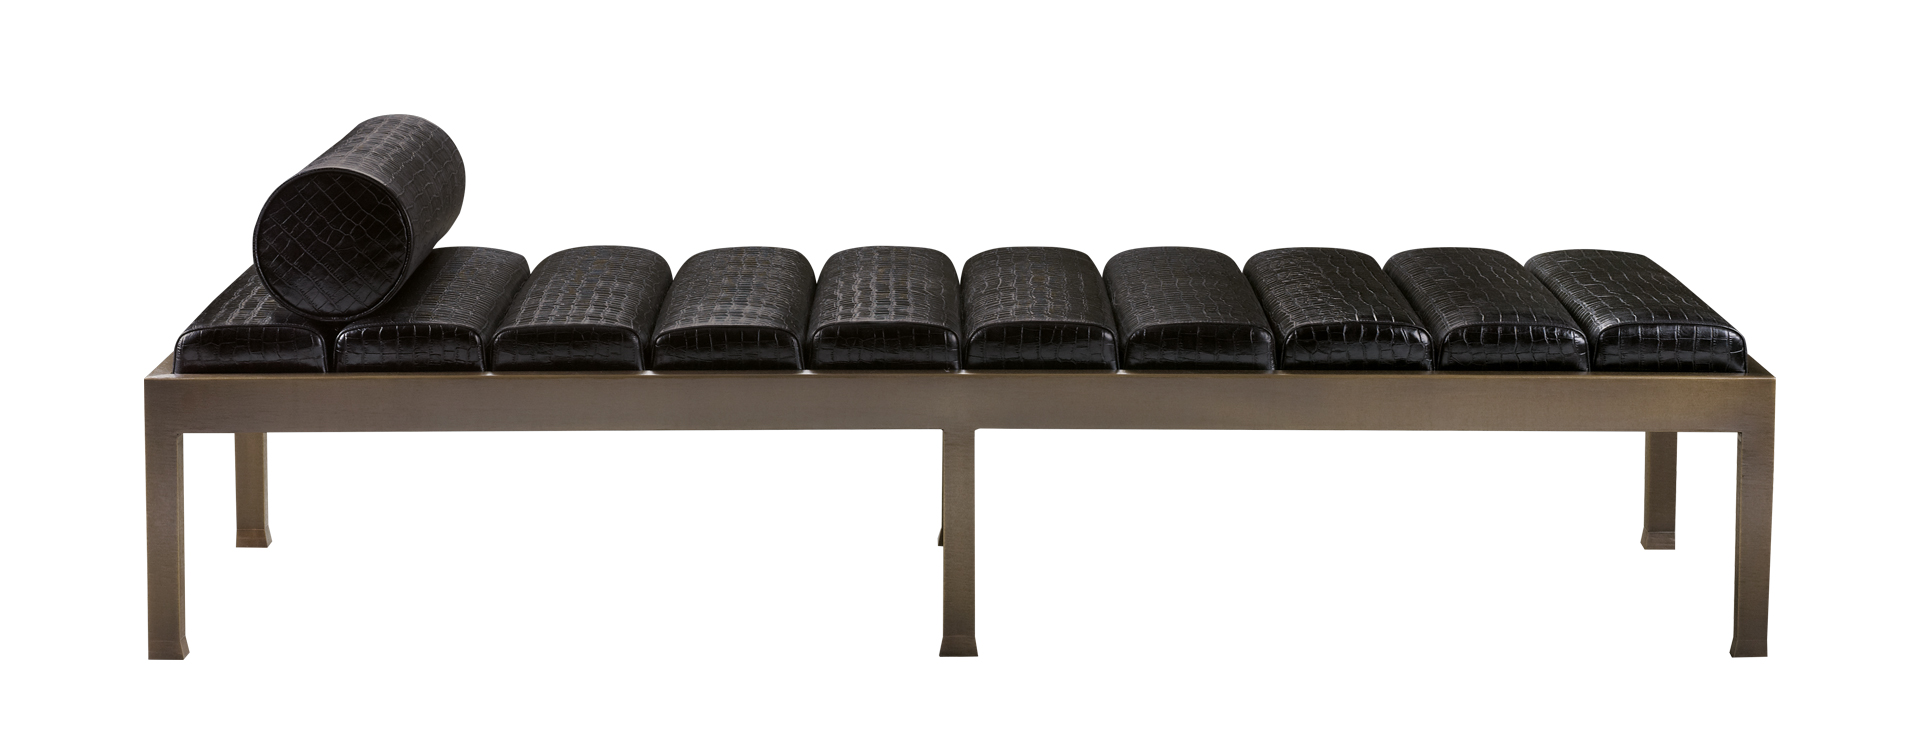 Gong is a bronze chaise longue with a leather mattress, from Promemoria's catalogue | Promemoria